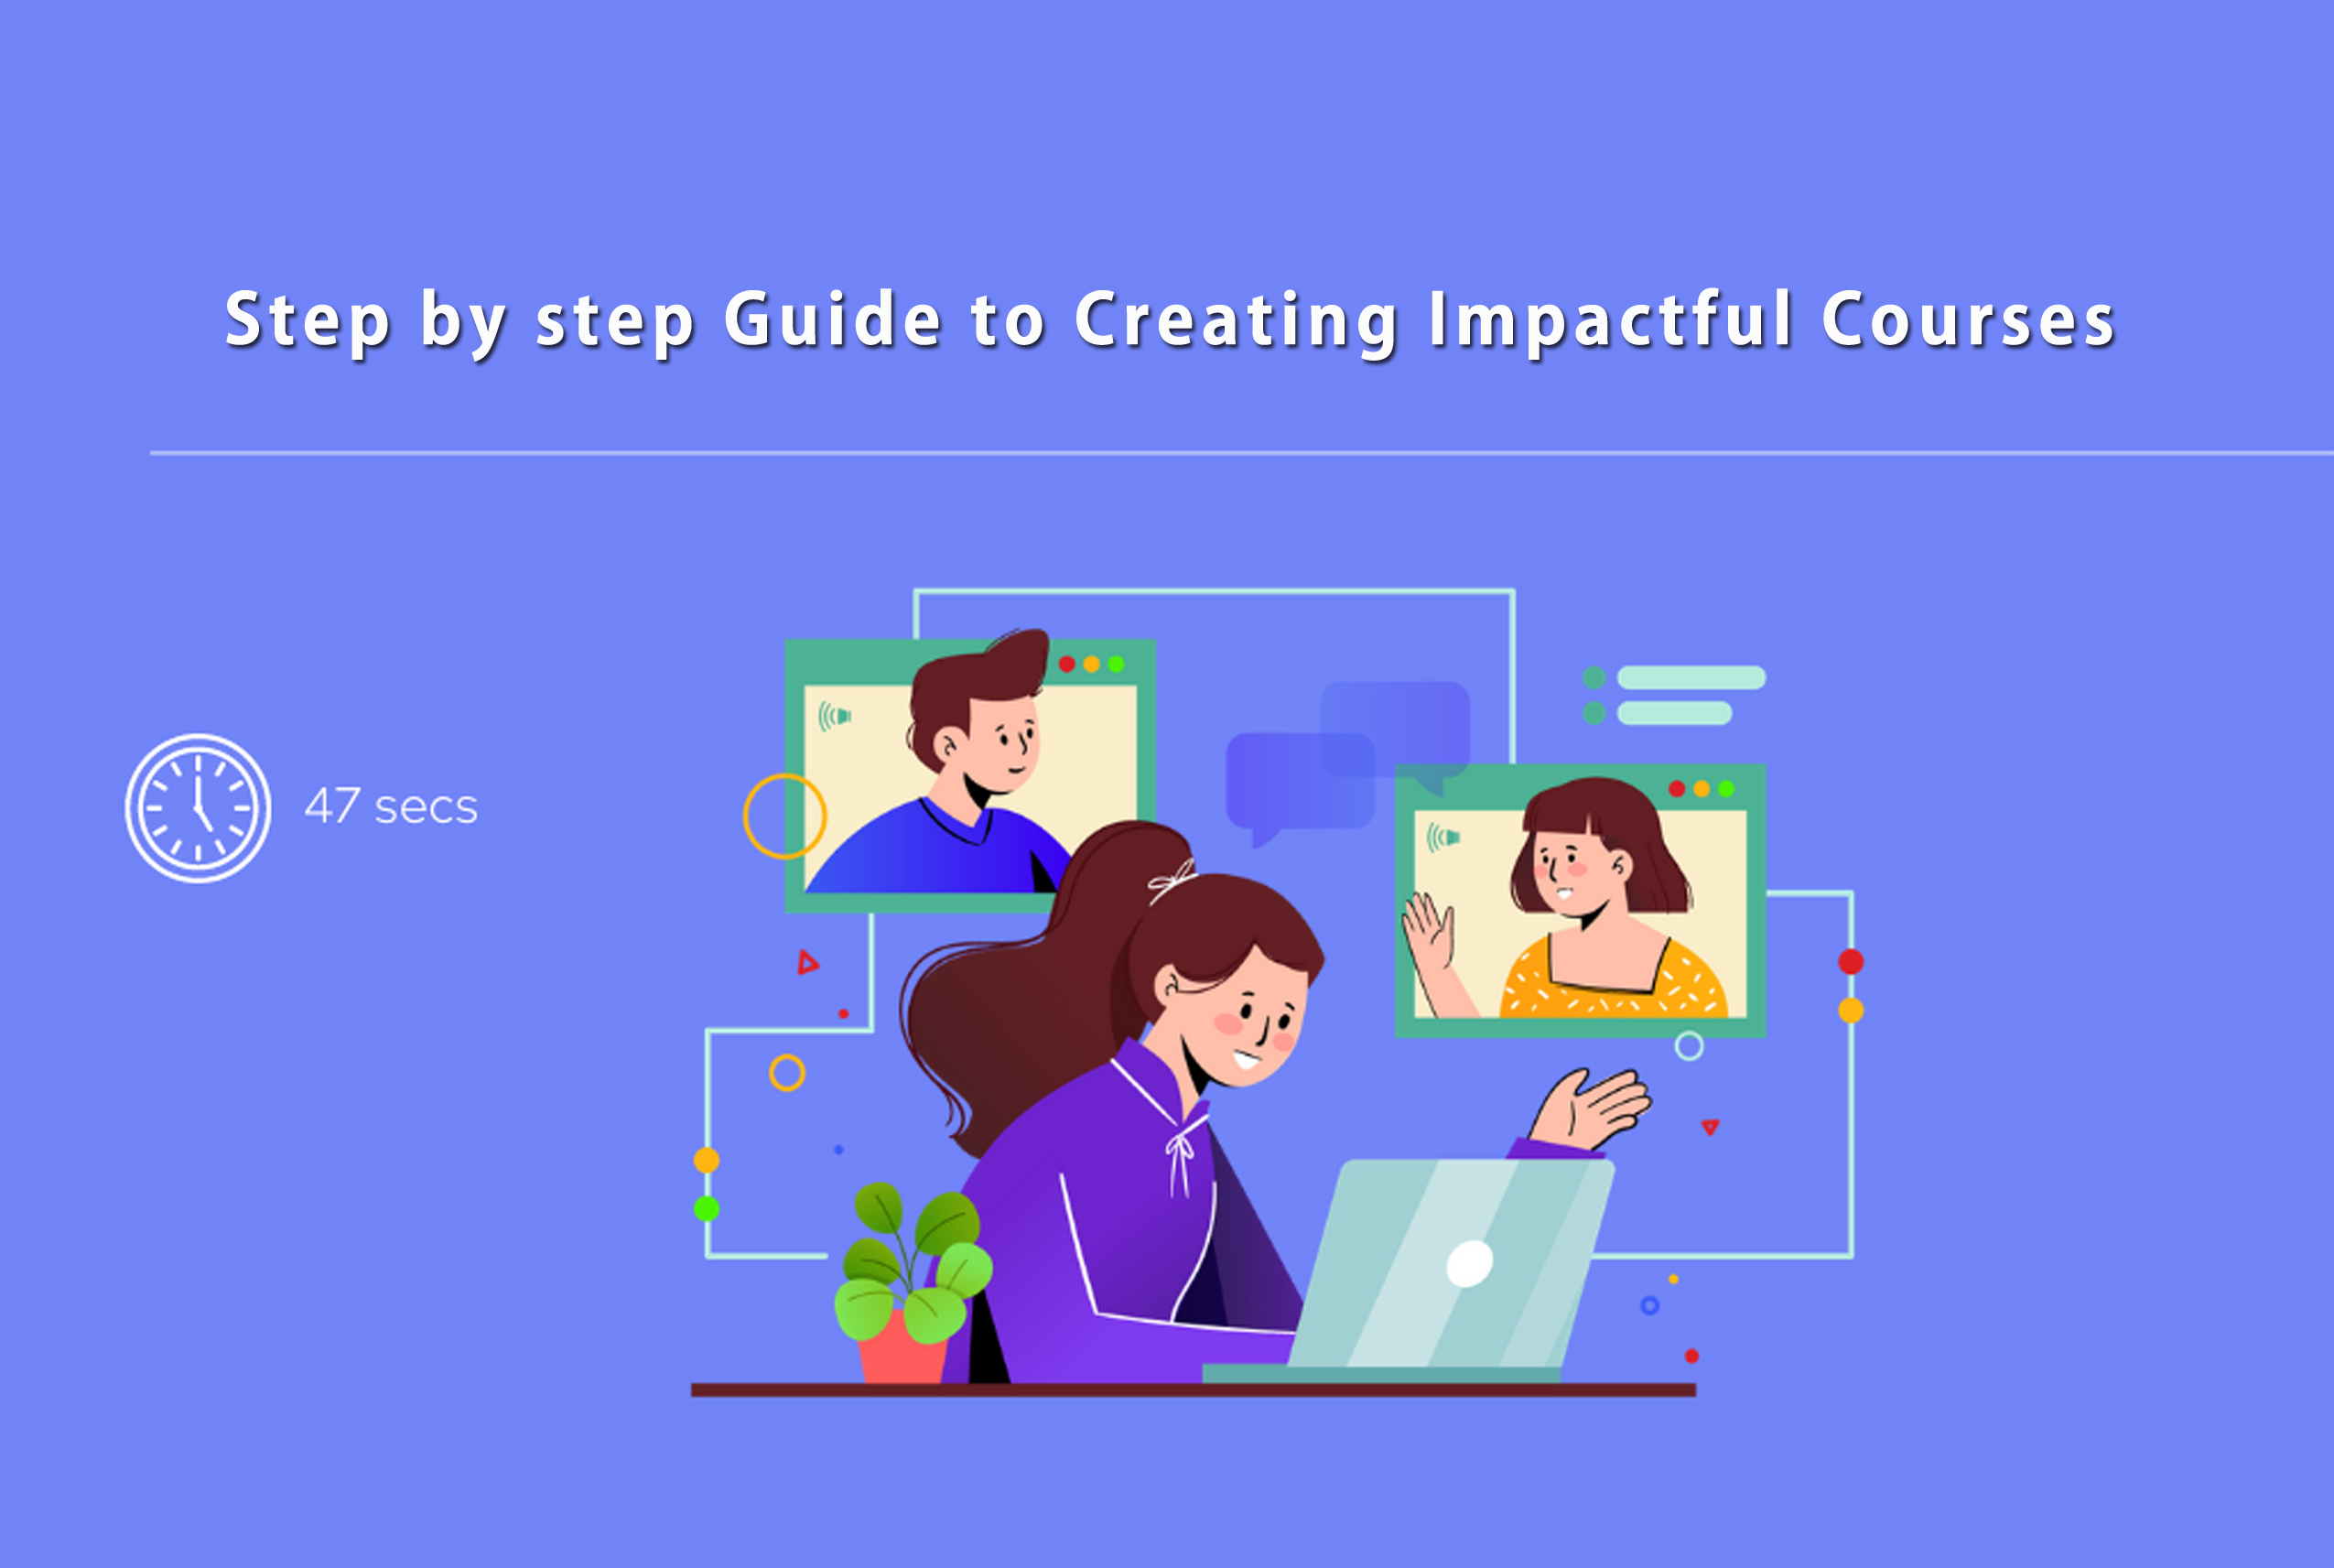 Step-by-step guide to creating impactful courses